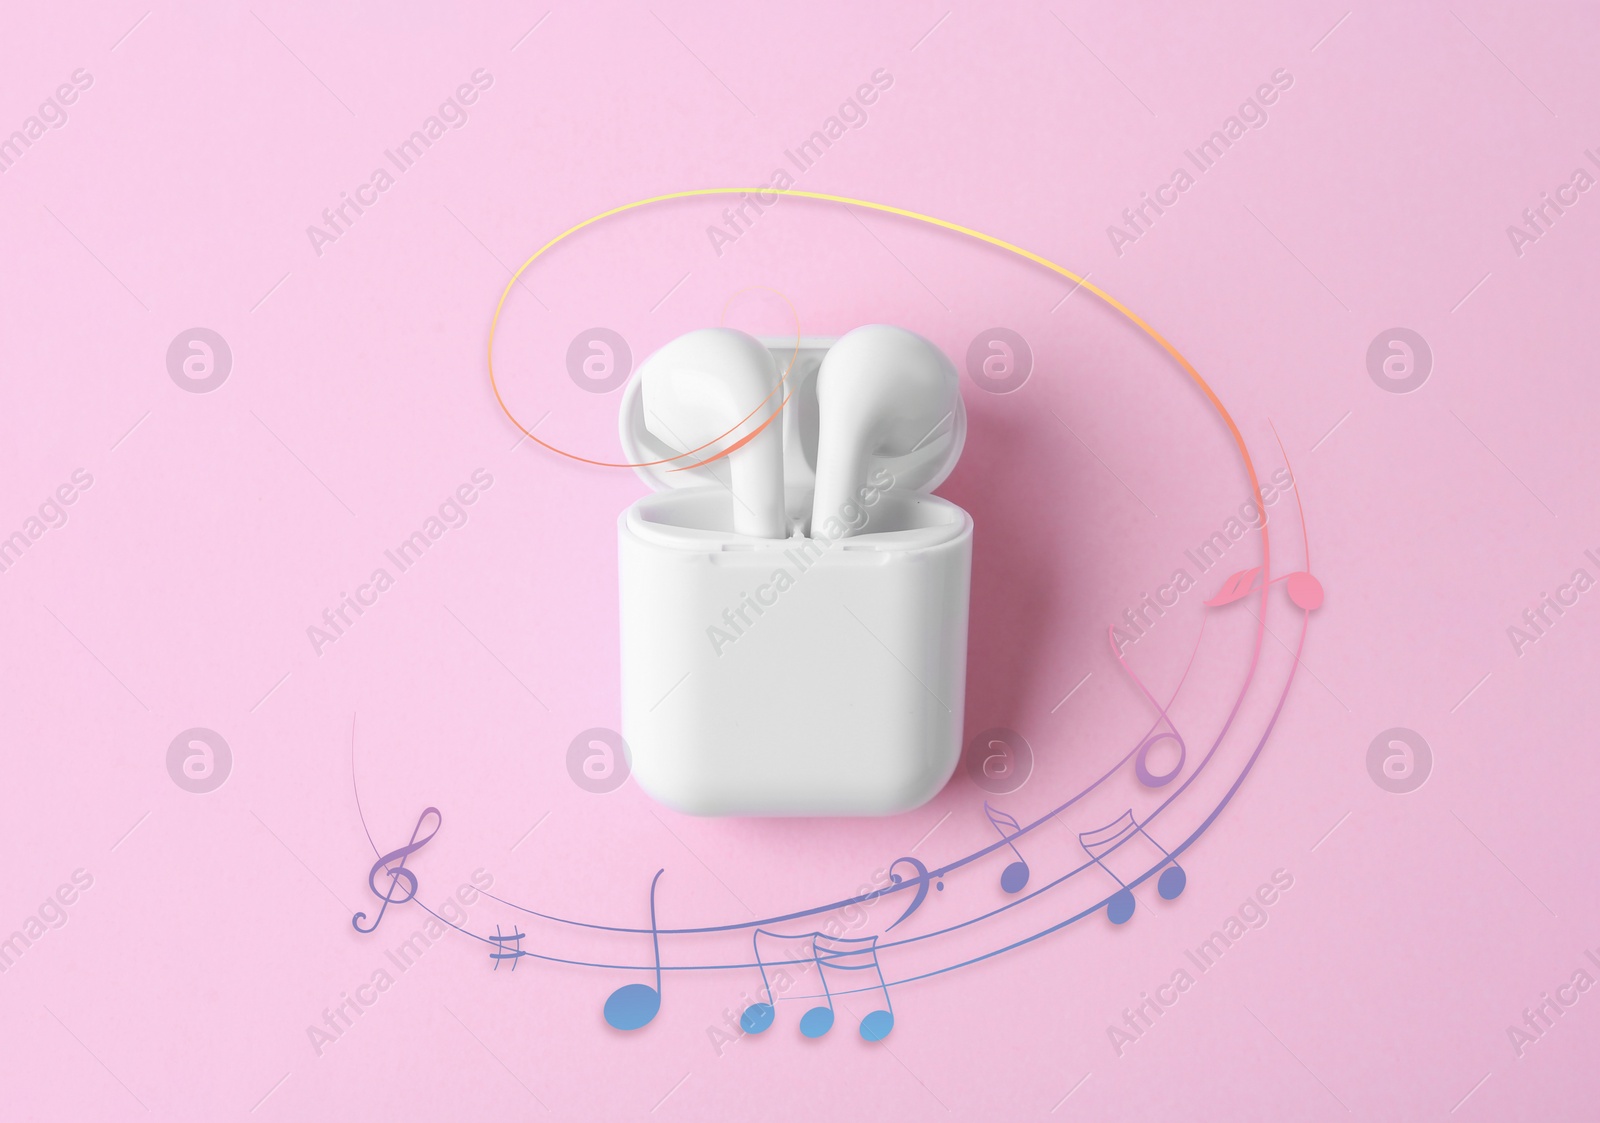 Image of Staff with music notes and treble clef flowing from white wireless earphones in charging case on pink background, top view